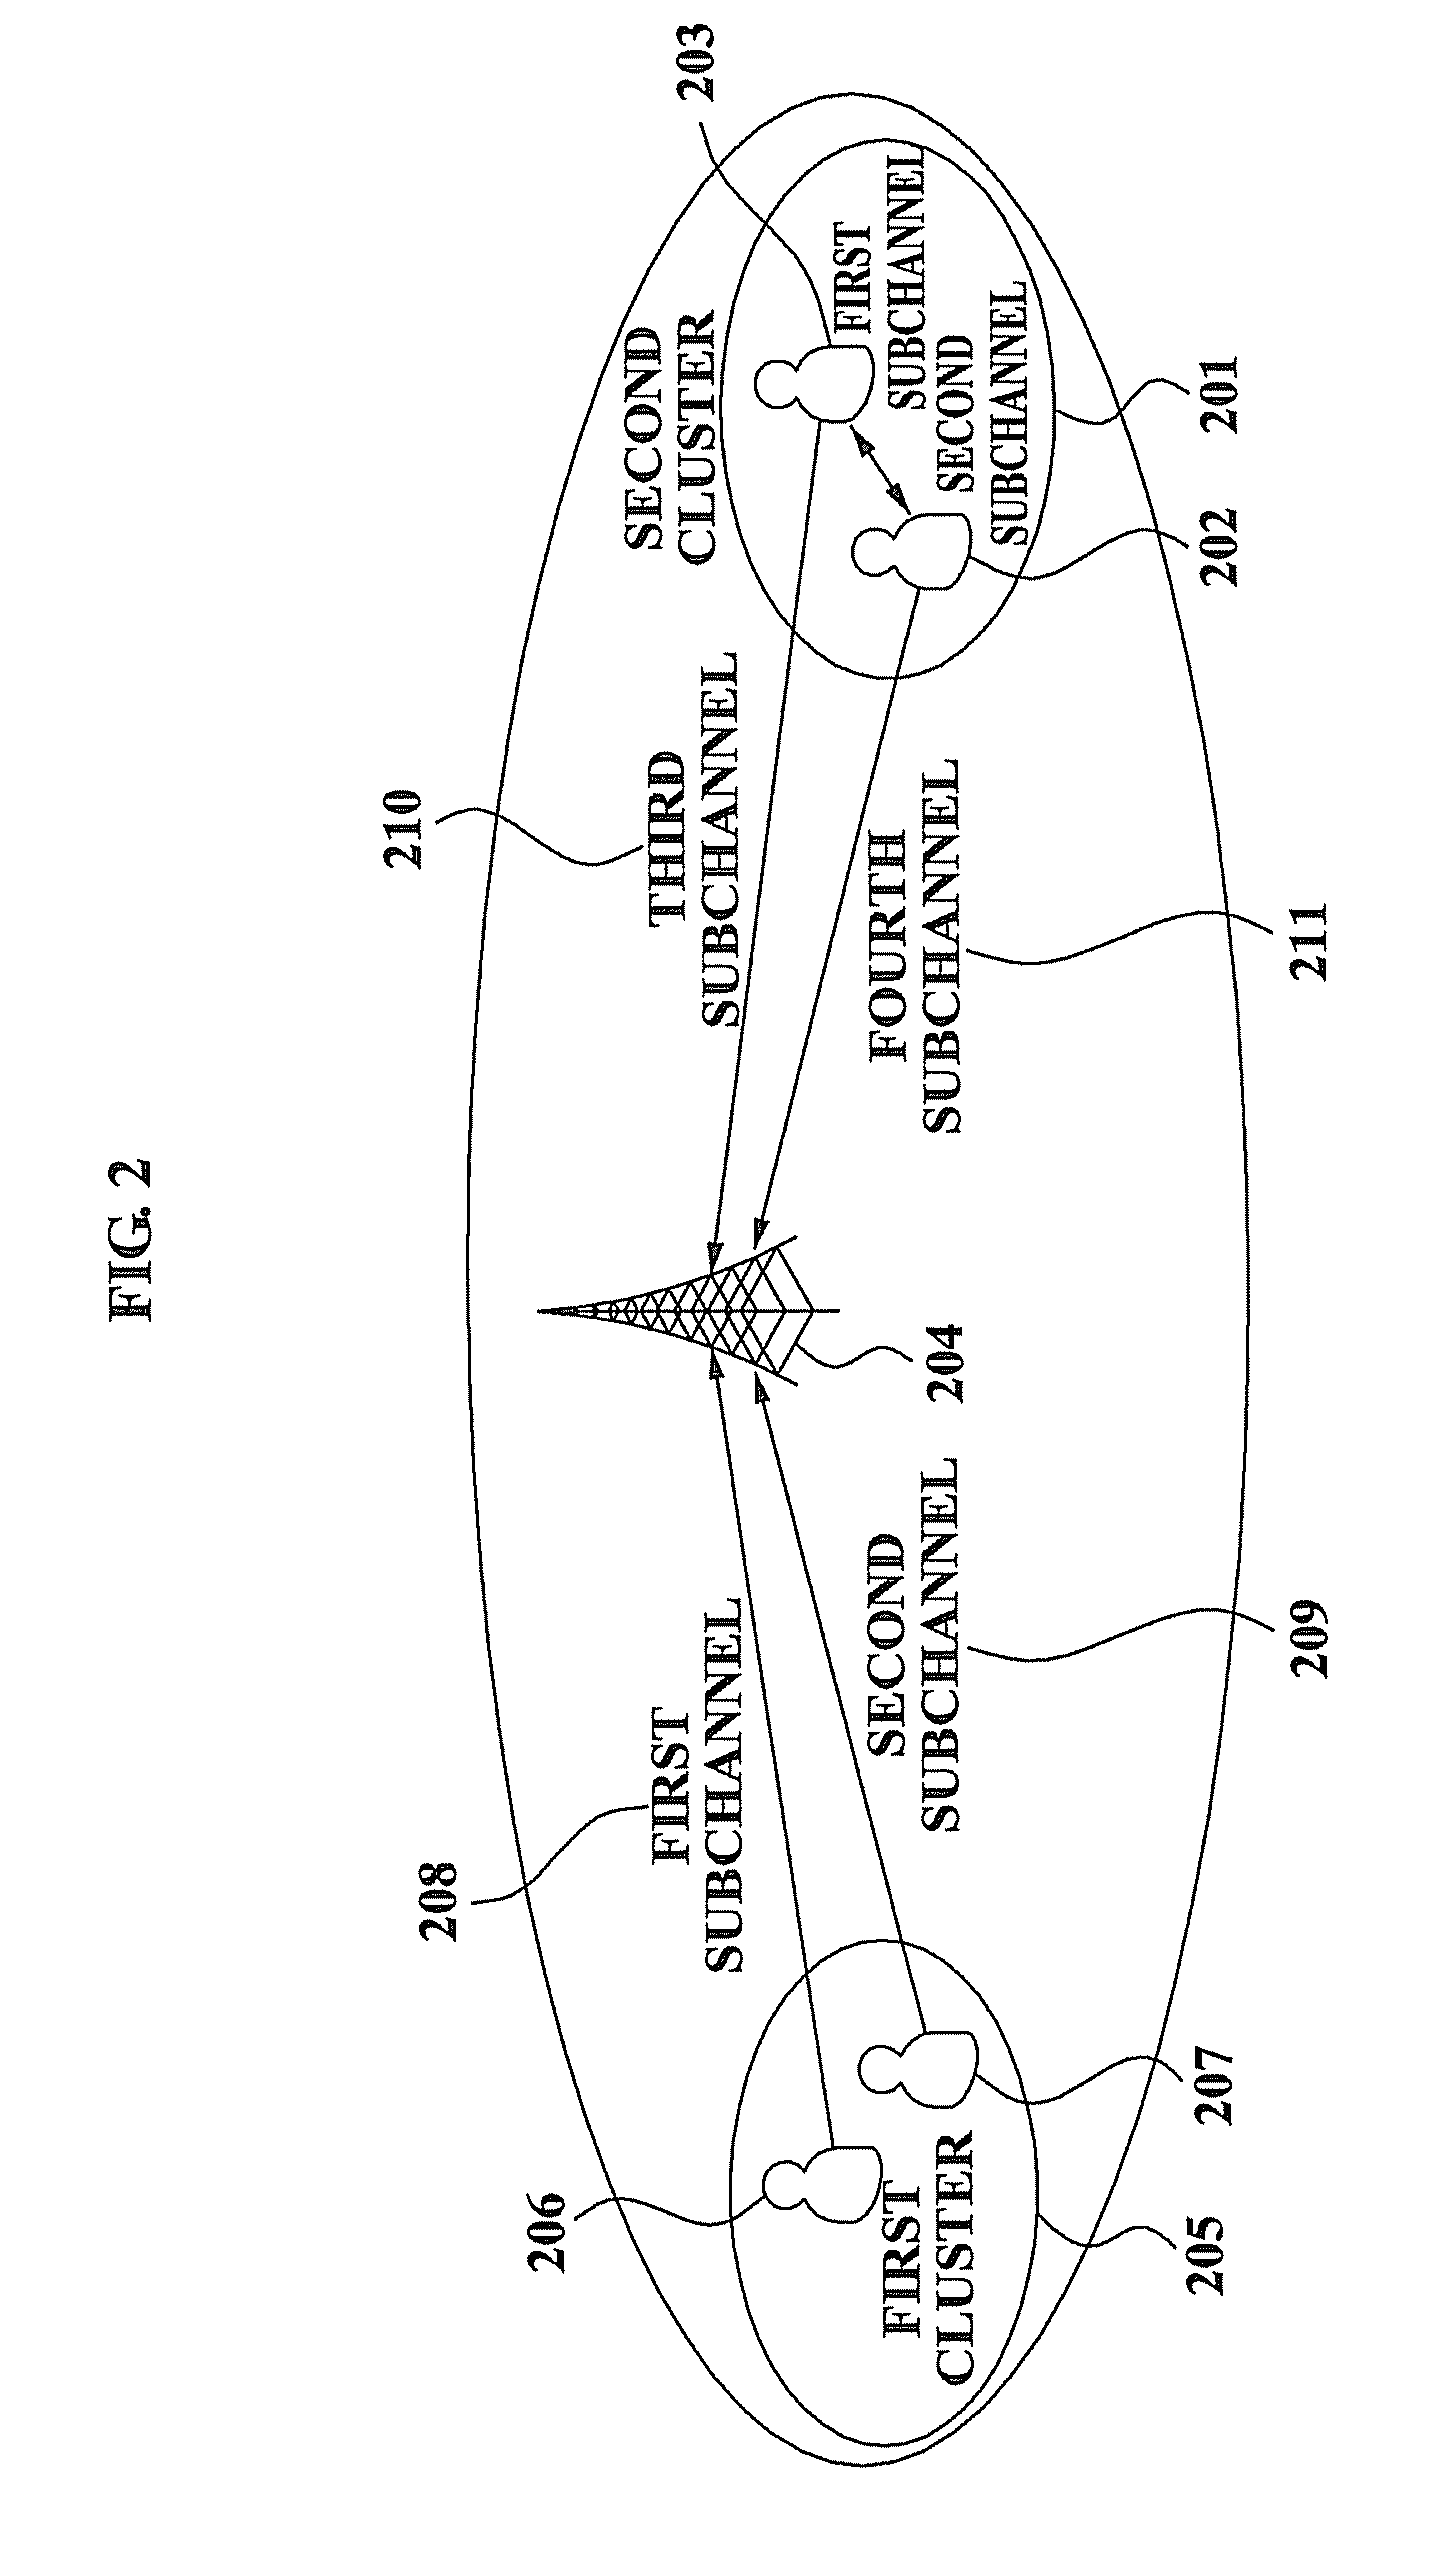 Method and apparatus for managing a cooperative diversity system